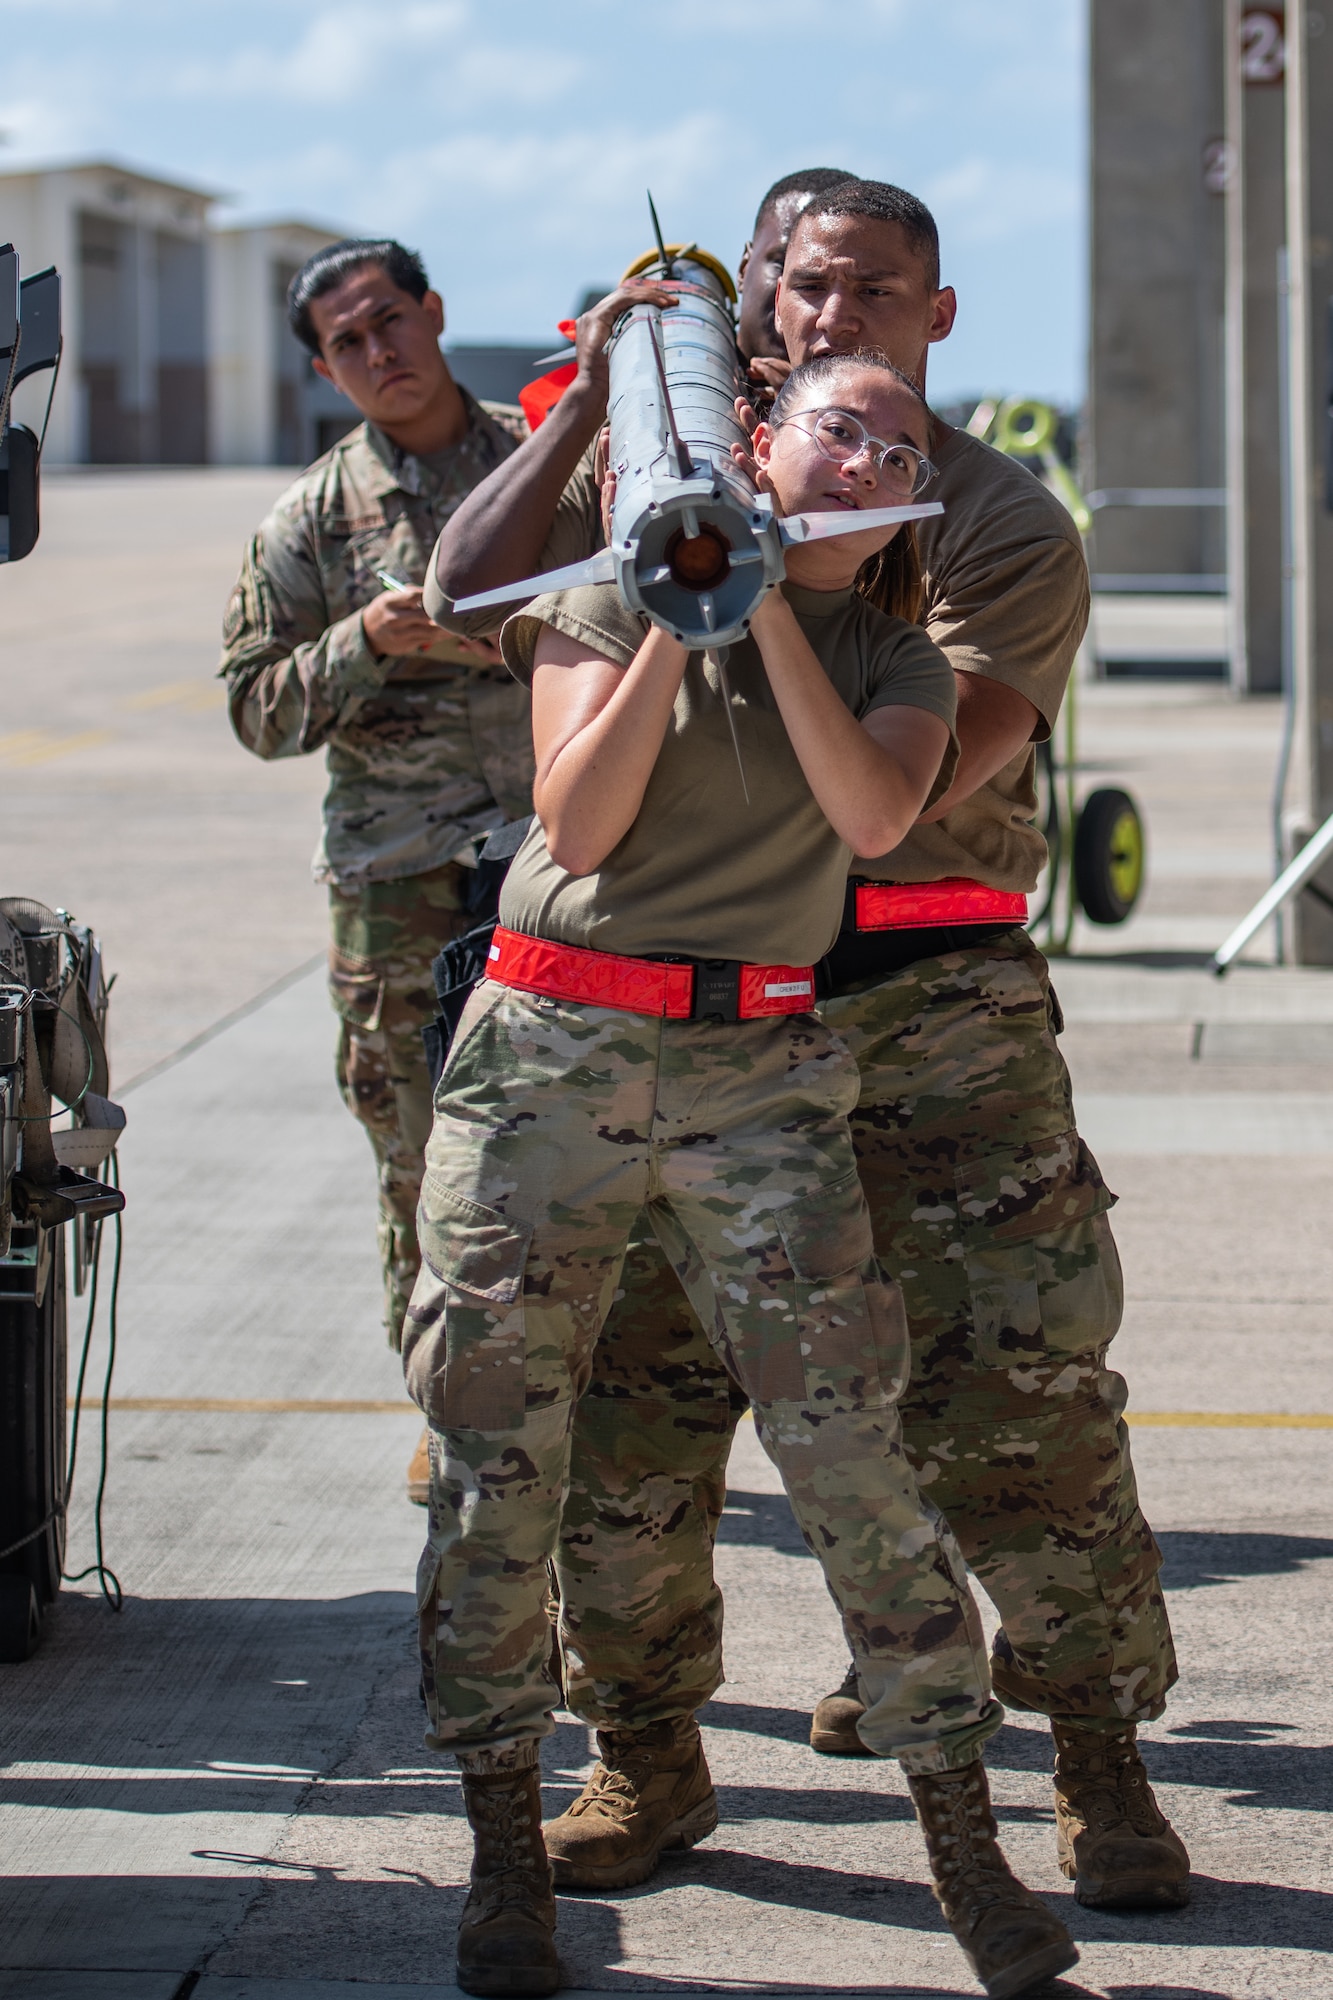 3 Airmen carry a missile while an evaluator watches from behind